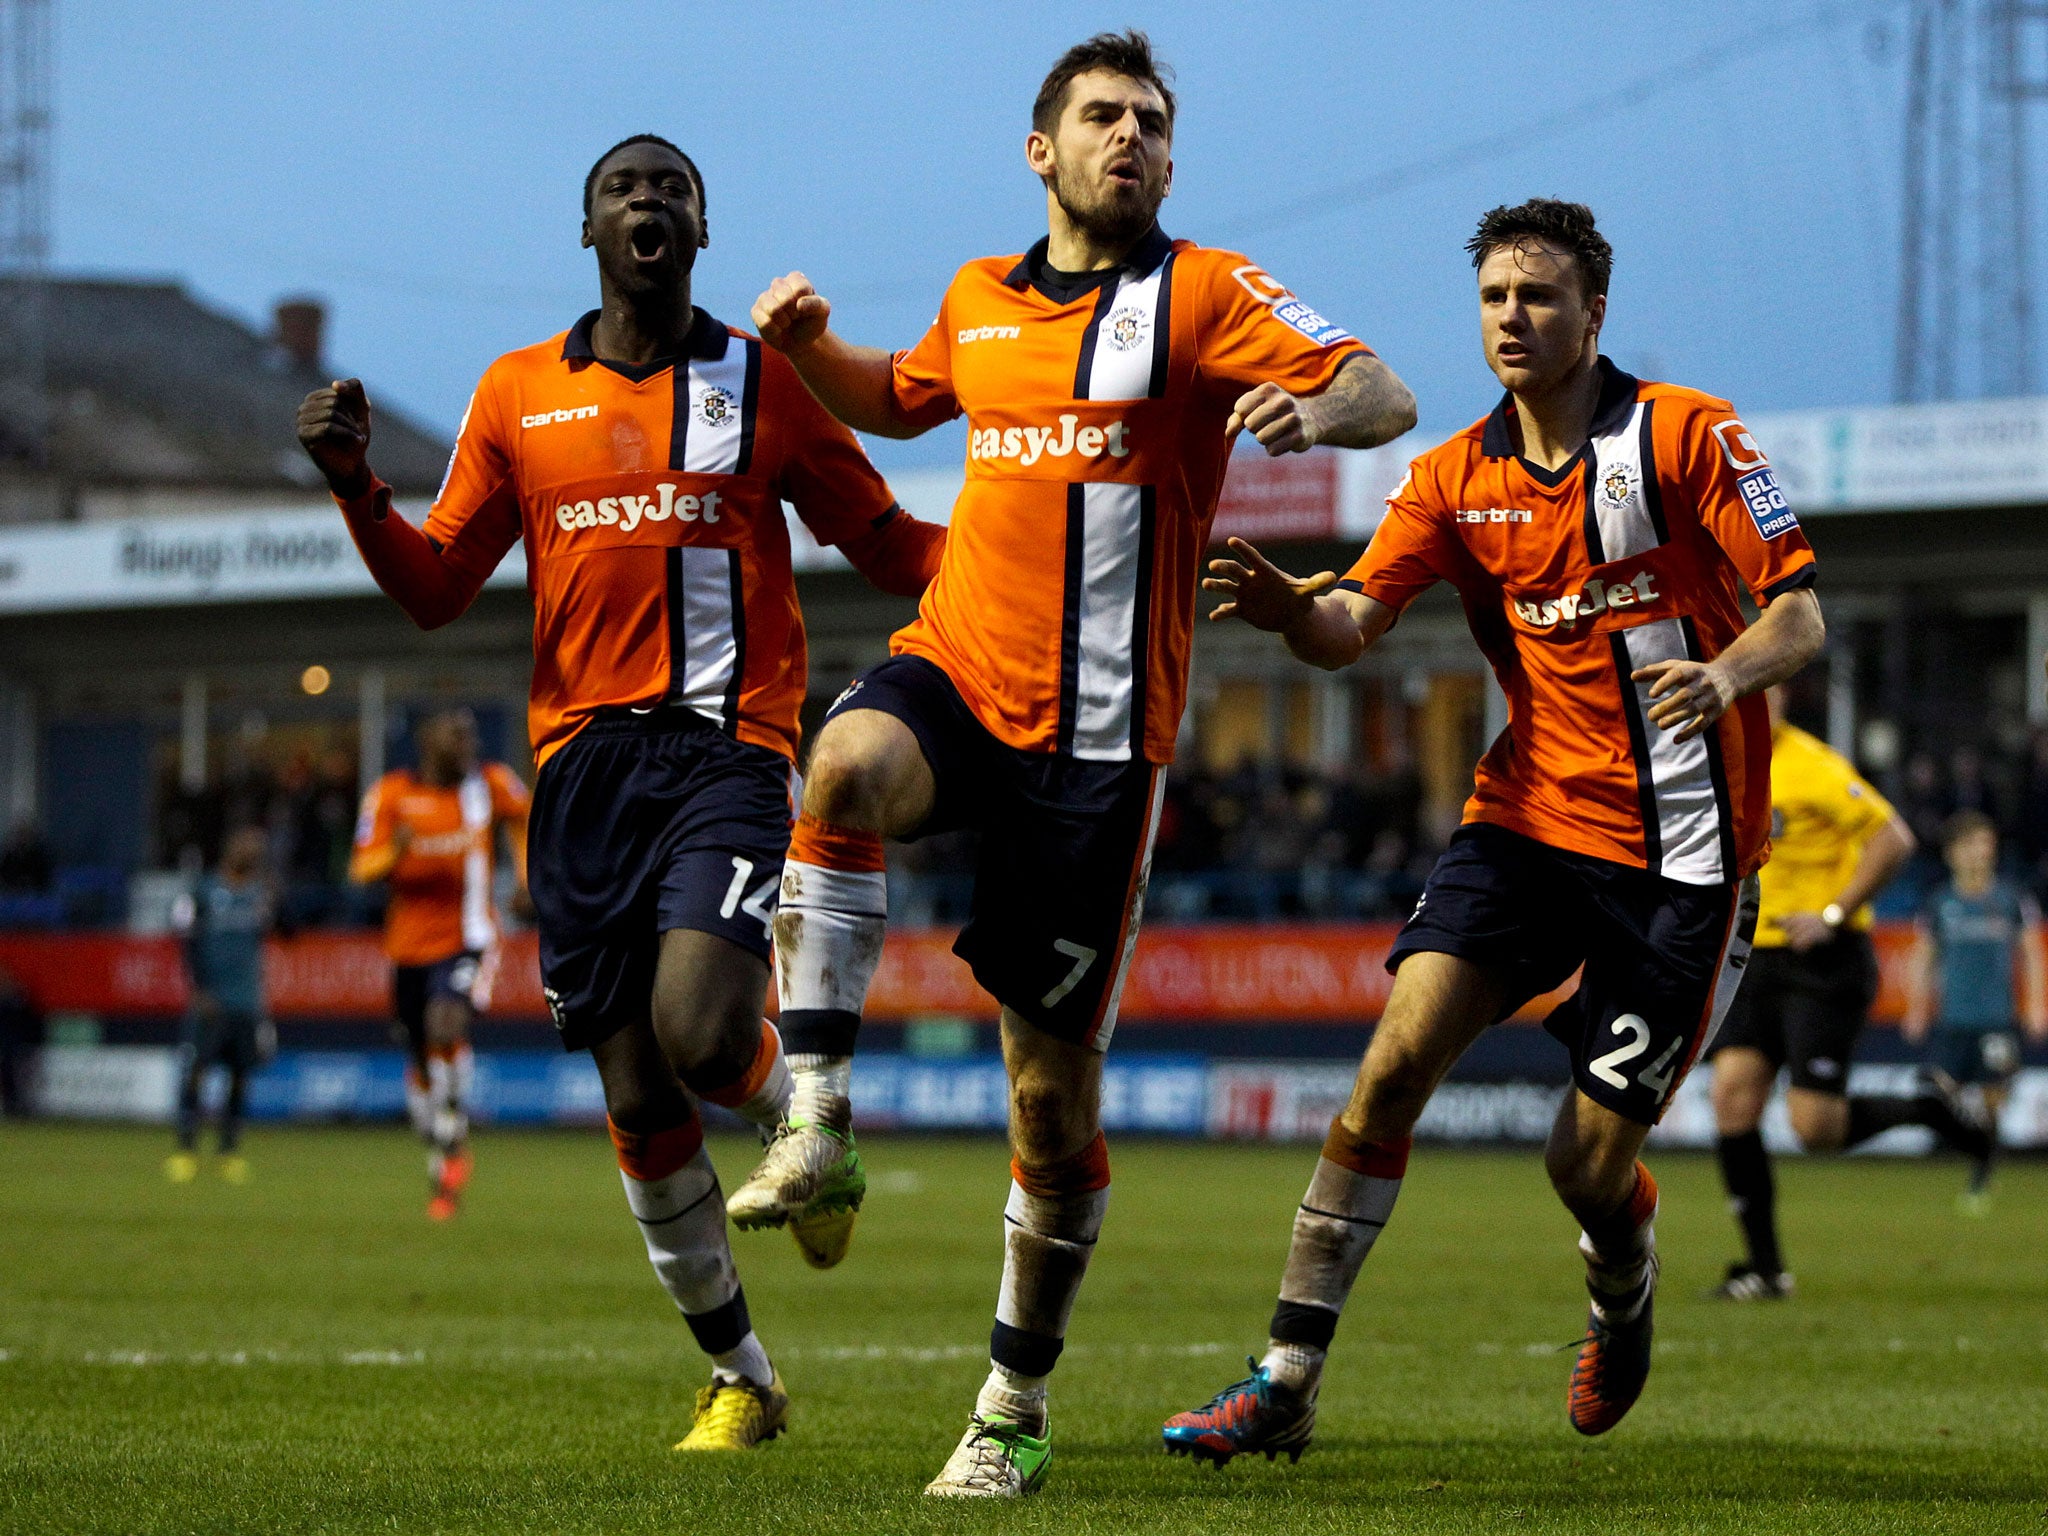 Alex Lawless of Luton celebrates after scoring the opening goal